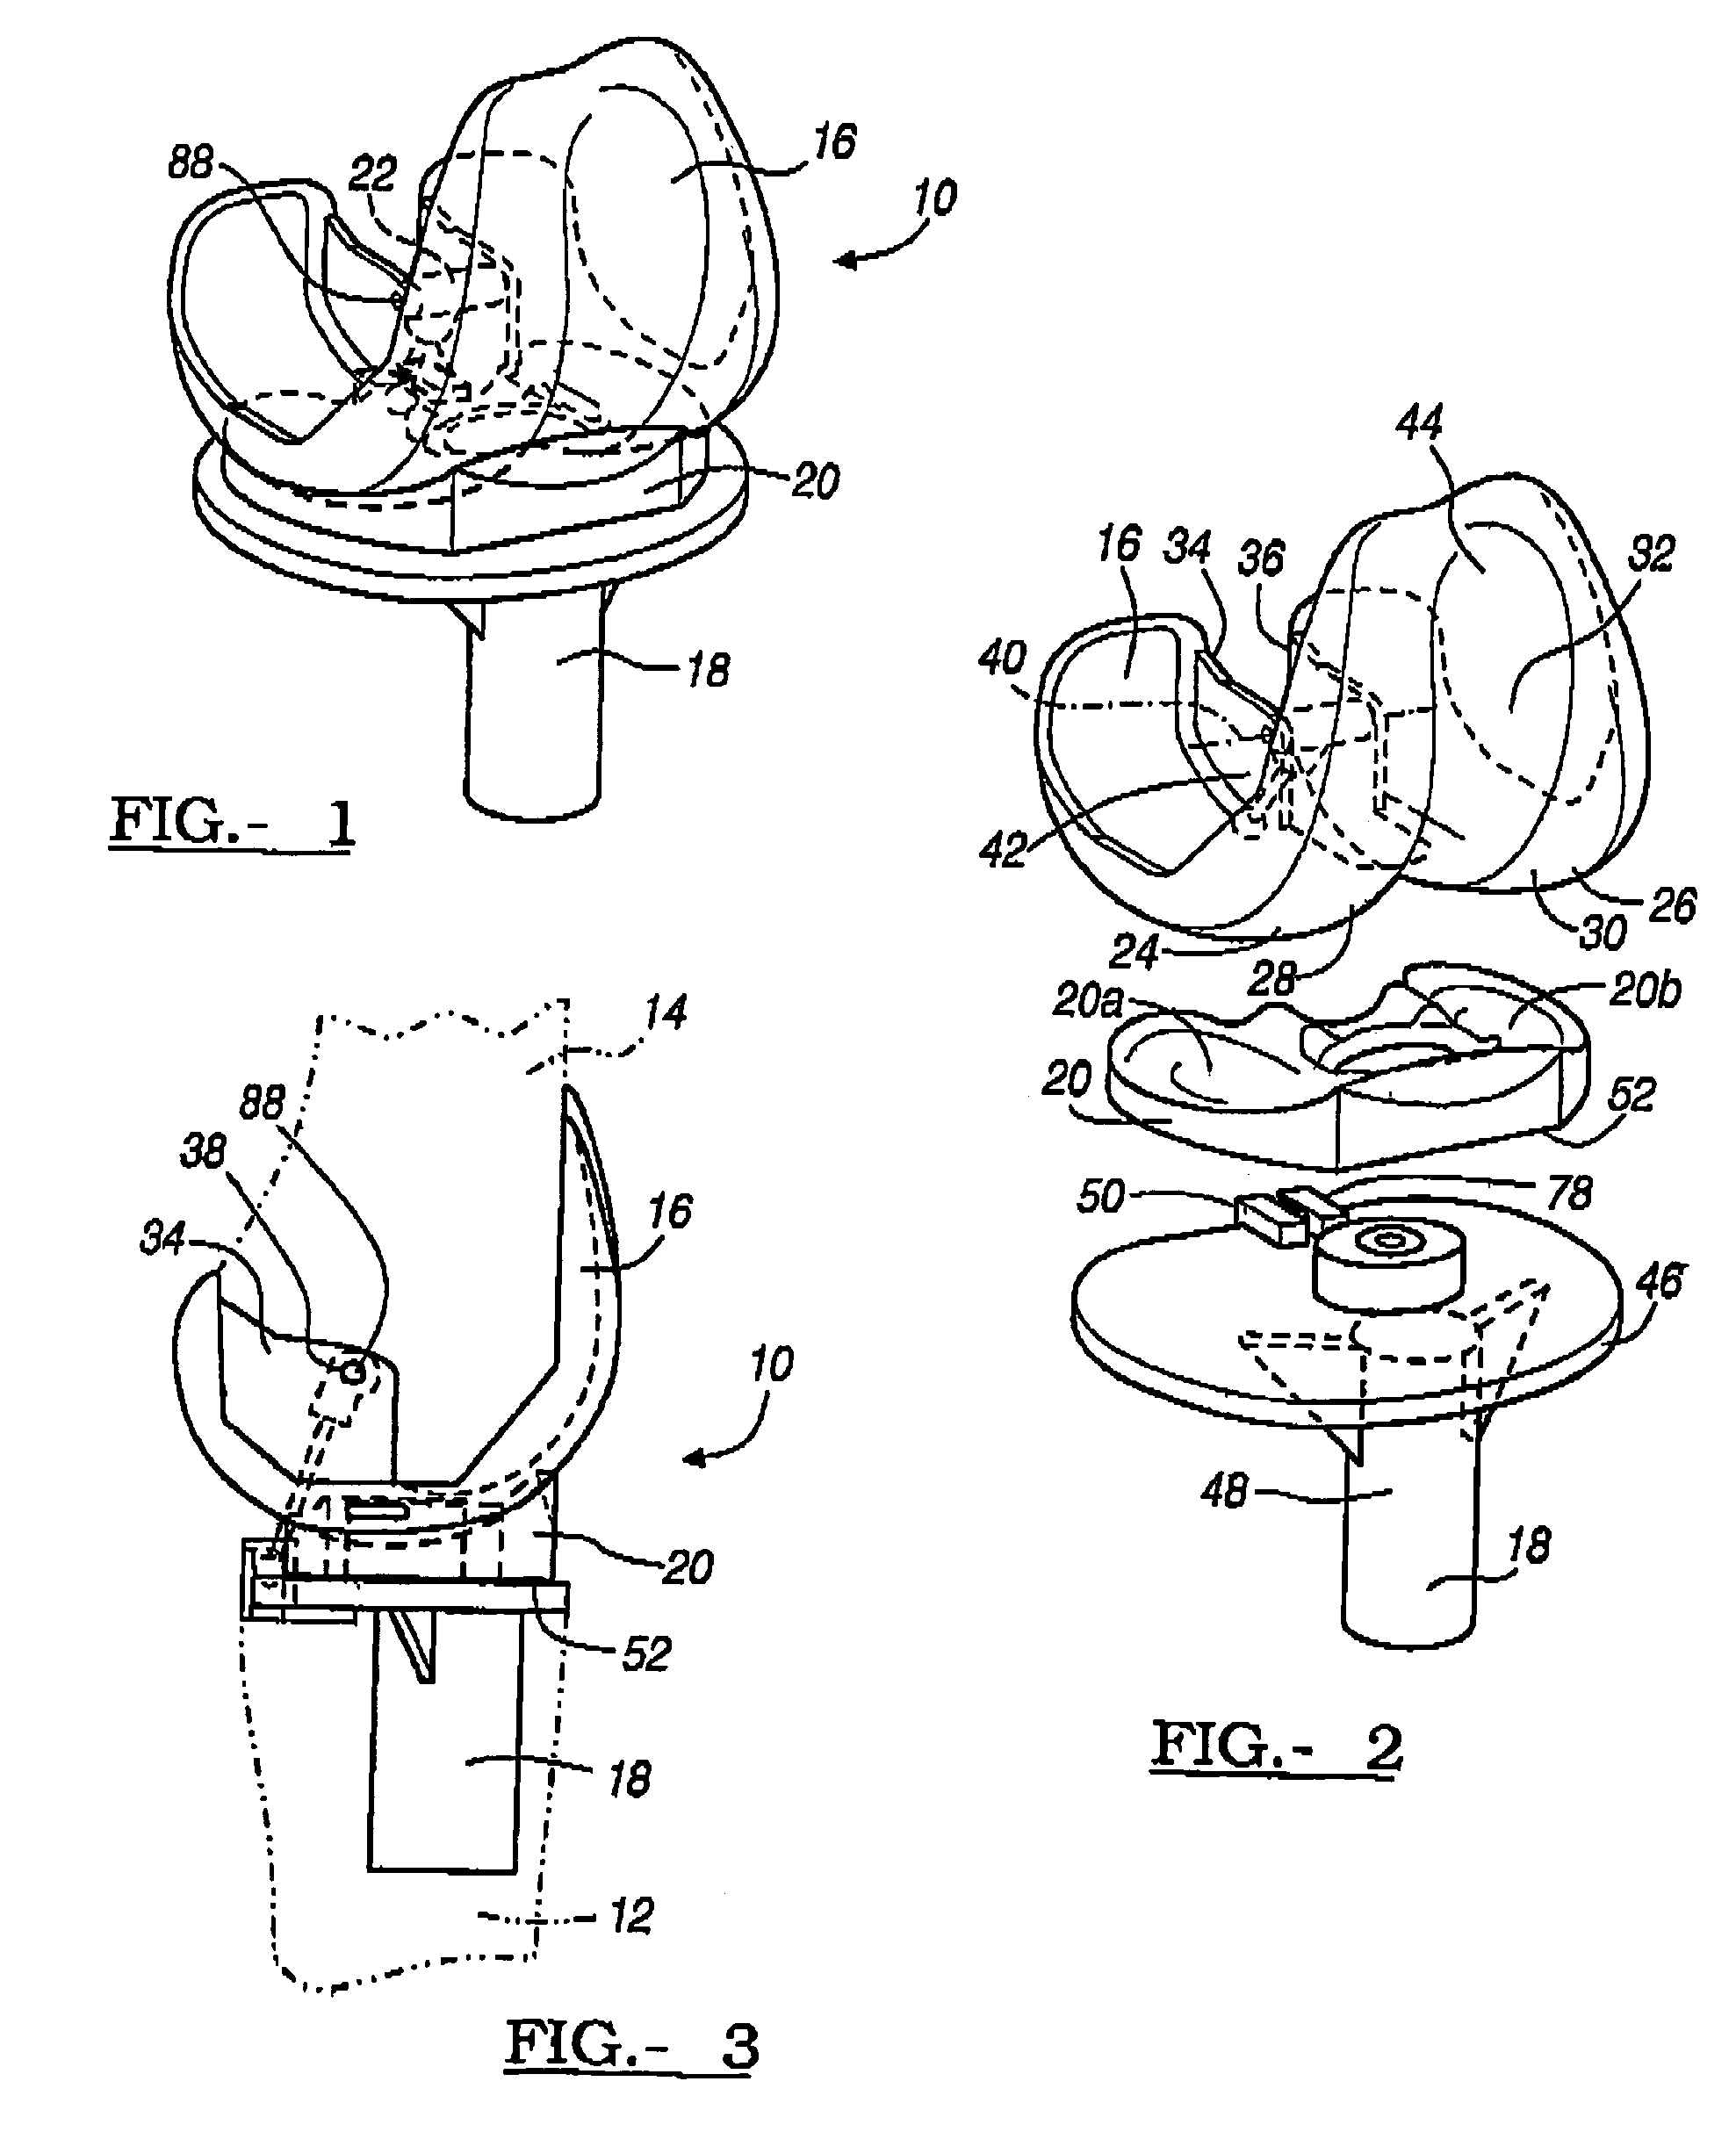 Method and apparatus for mechanically reconstructing ligaments in a knee prosthesis